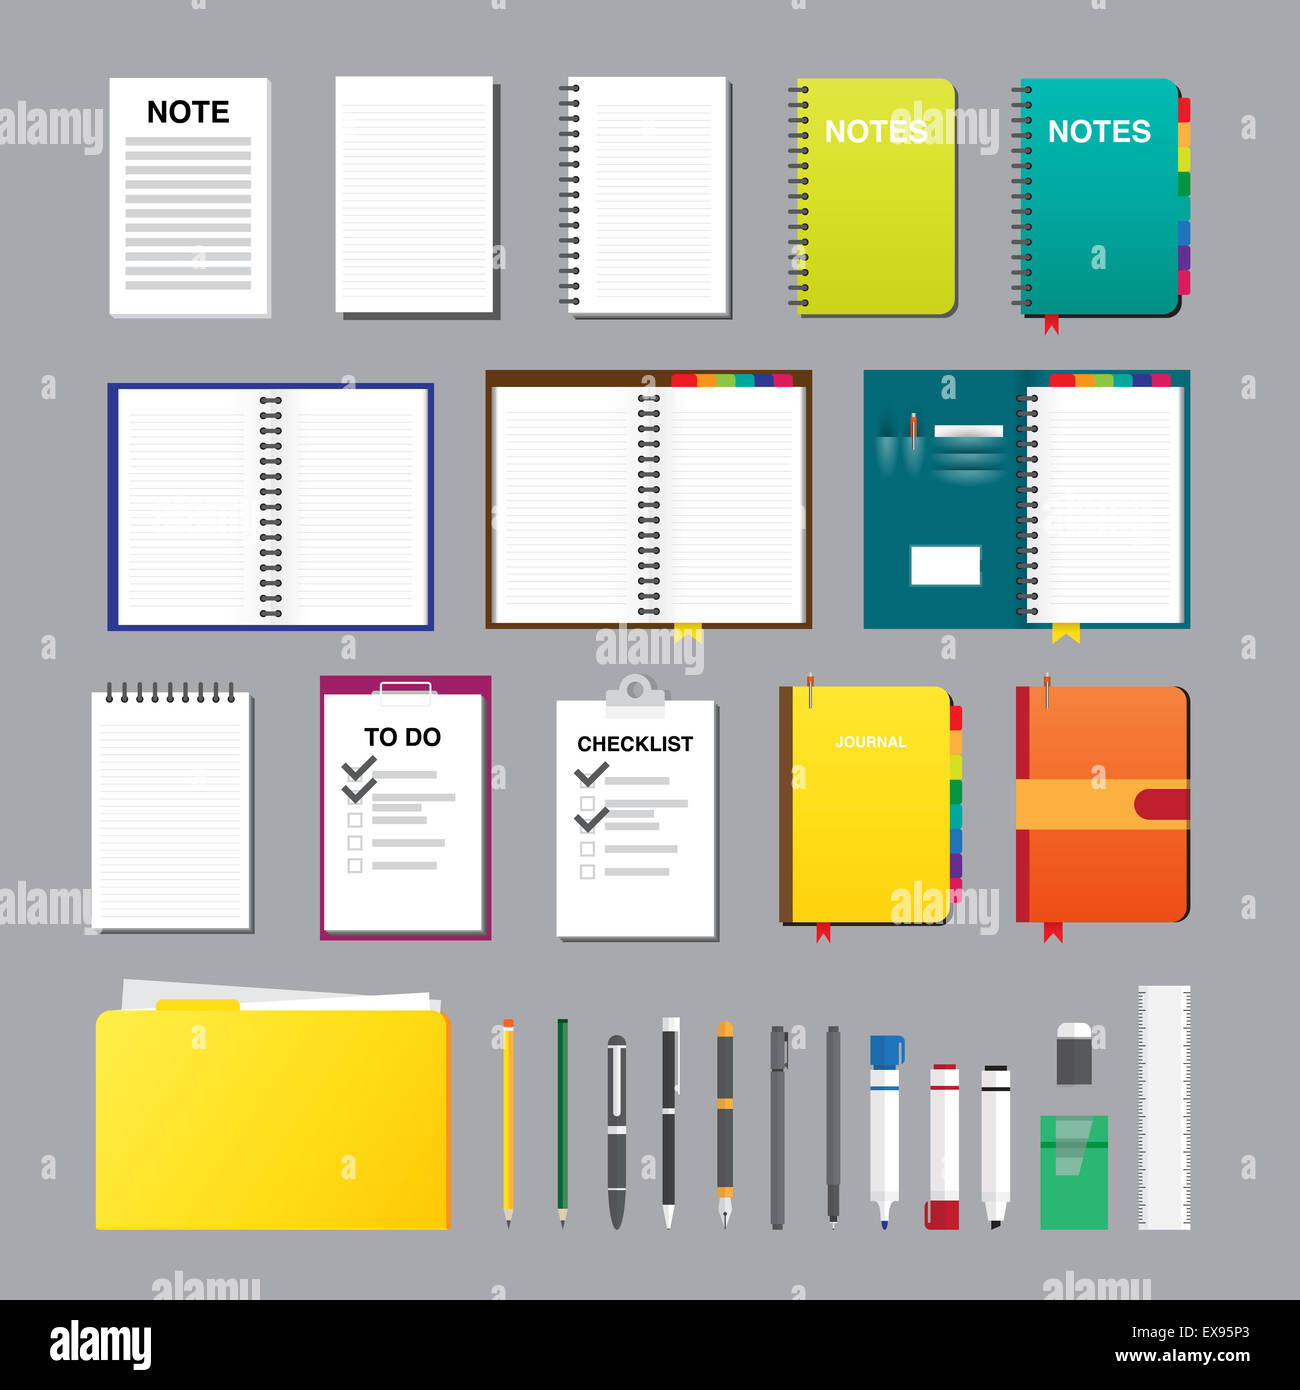 Vector illustration of notes flat design elements. Stock Photo